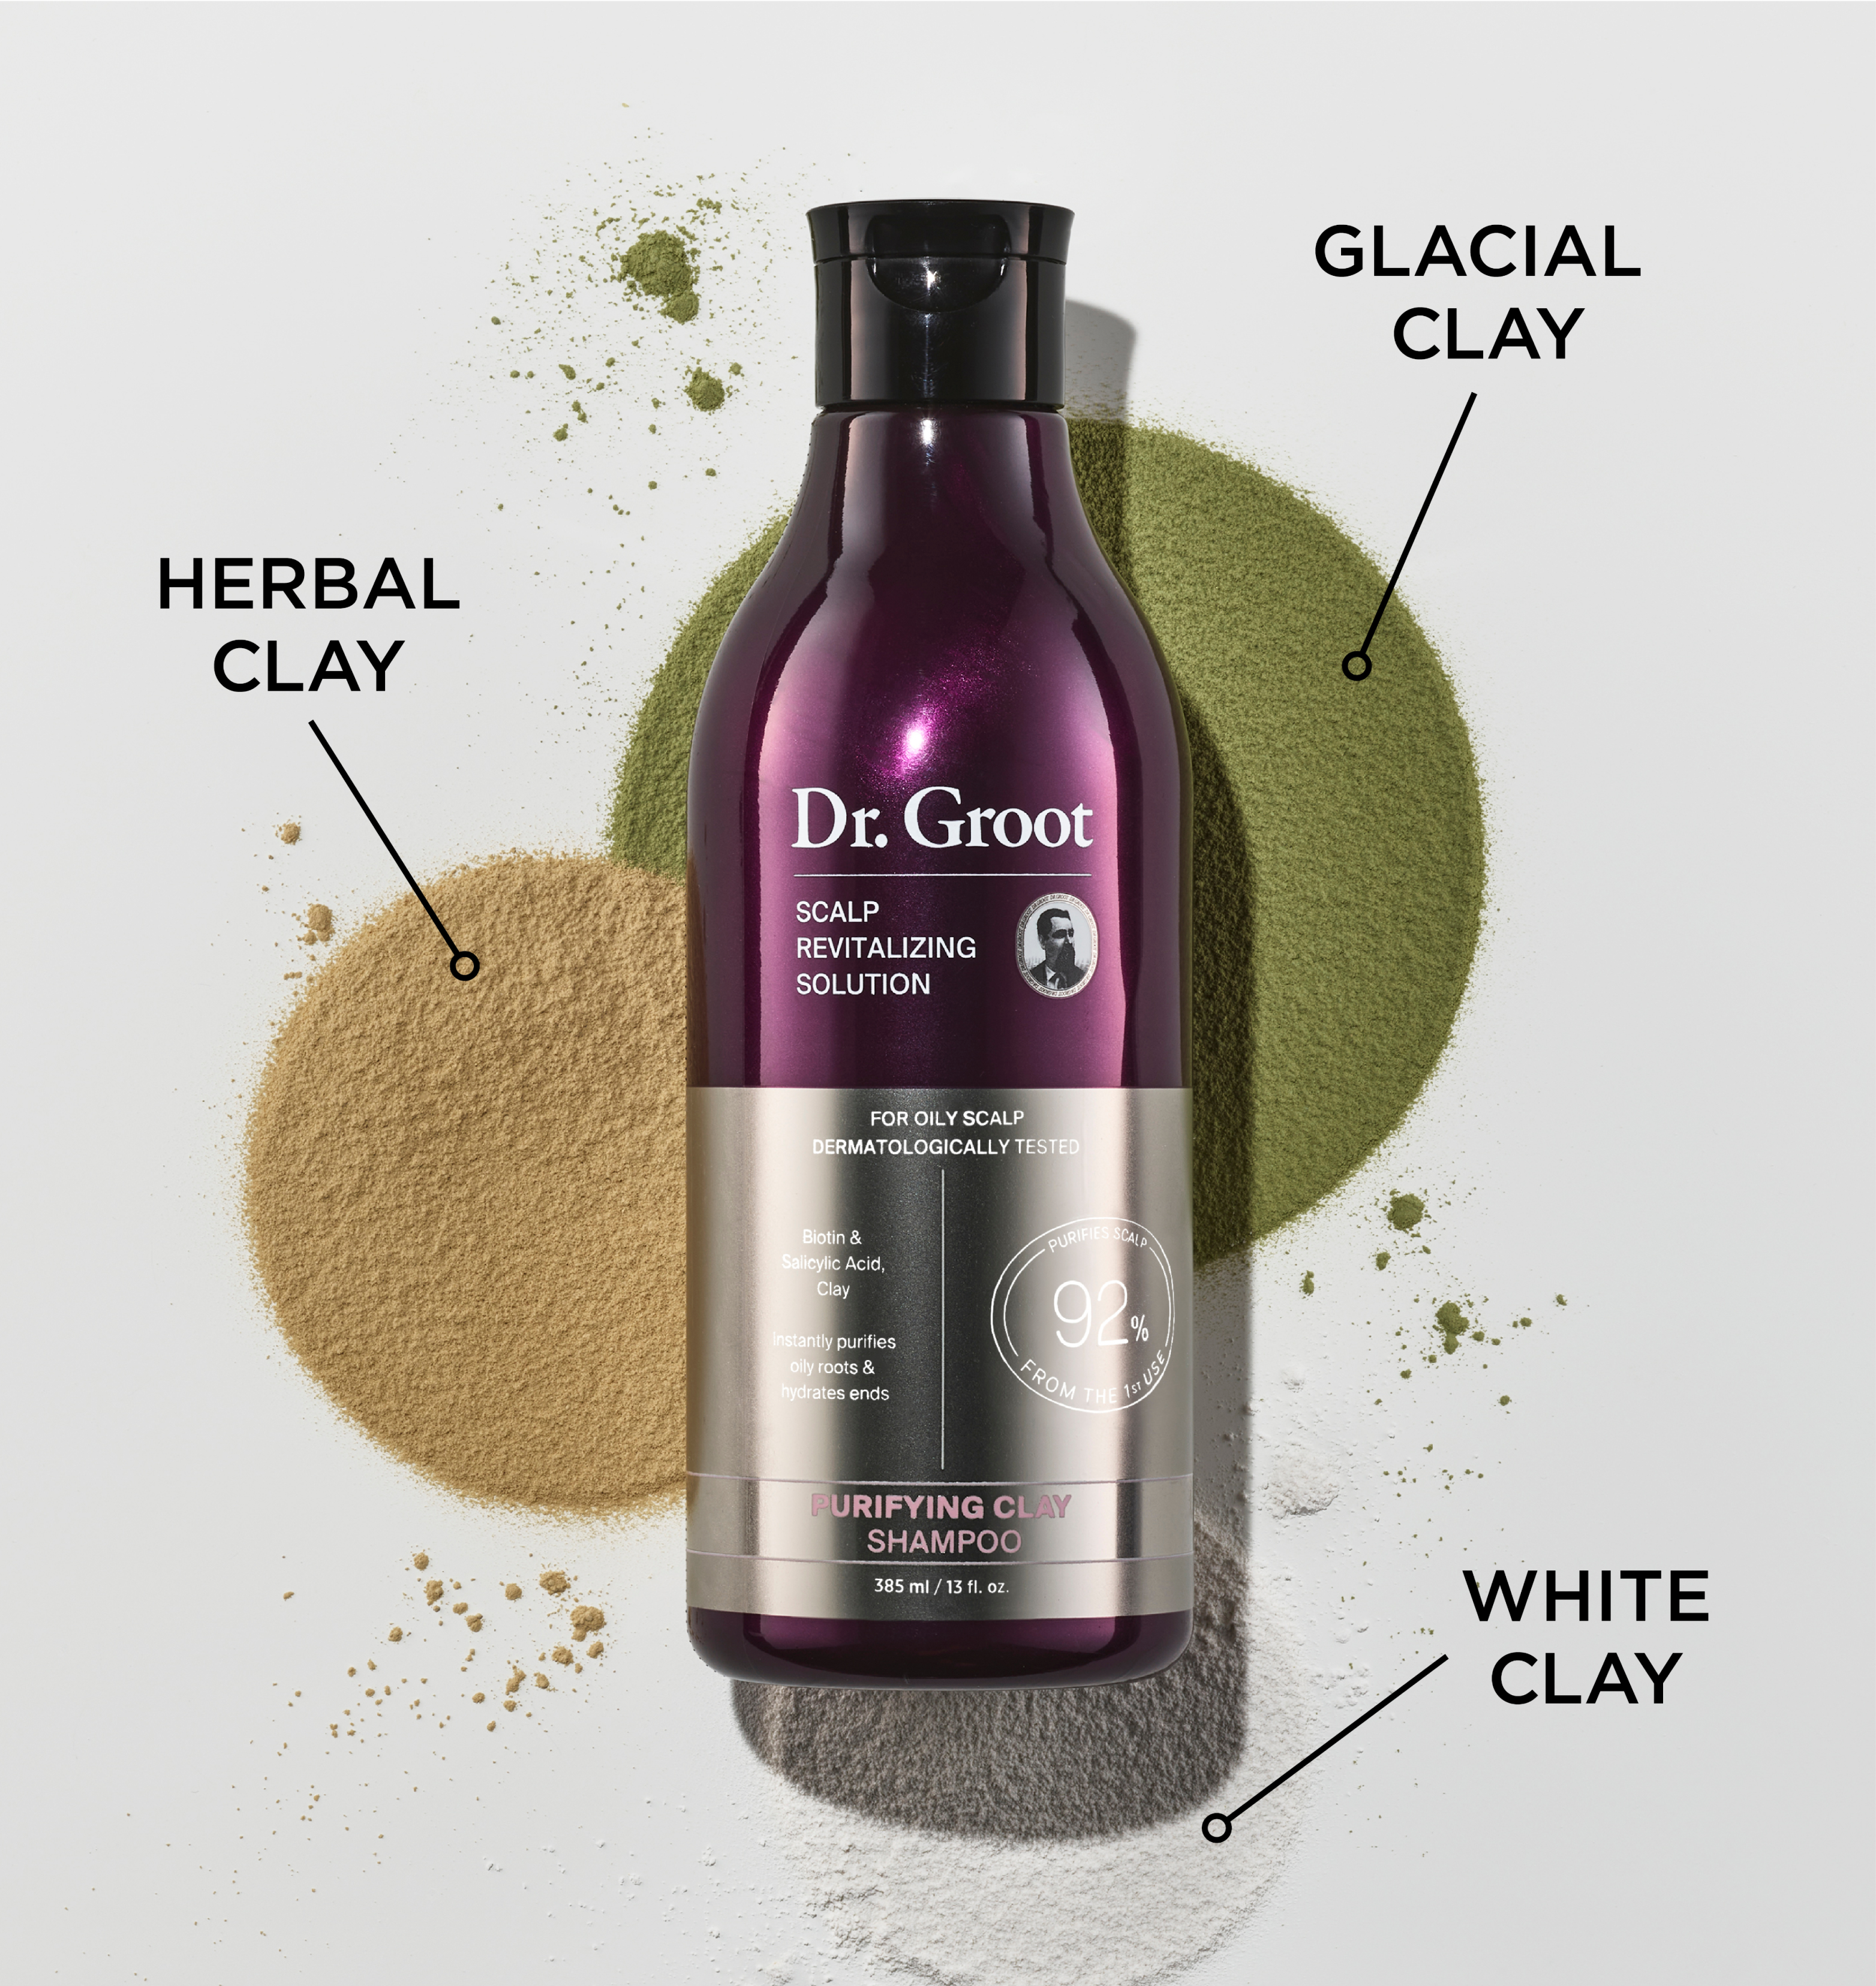 A bottle of Dr. Groot Purifying Clay Shampoo rests on a spread of glacial clay, herbal clay, and white clay.